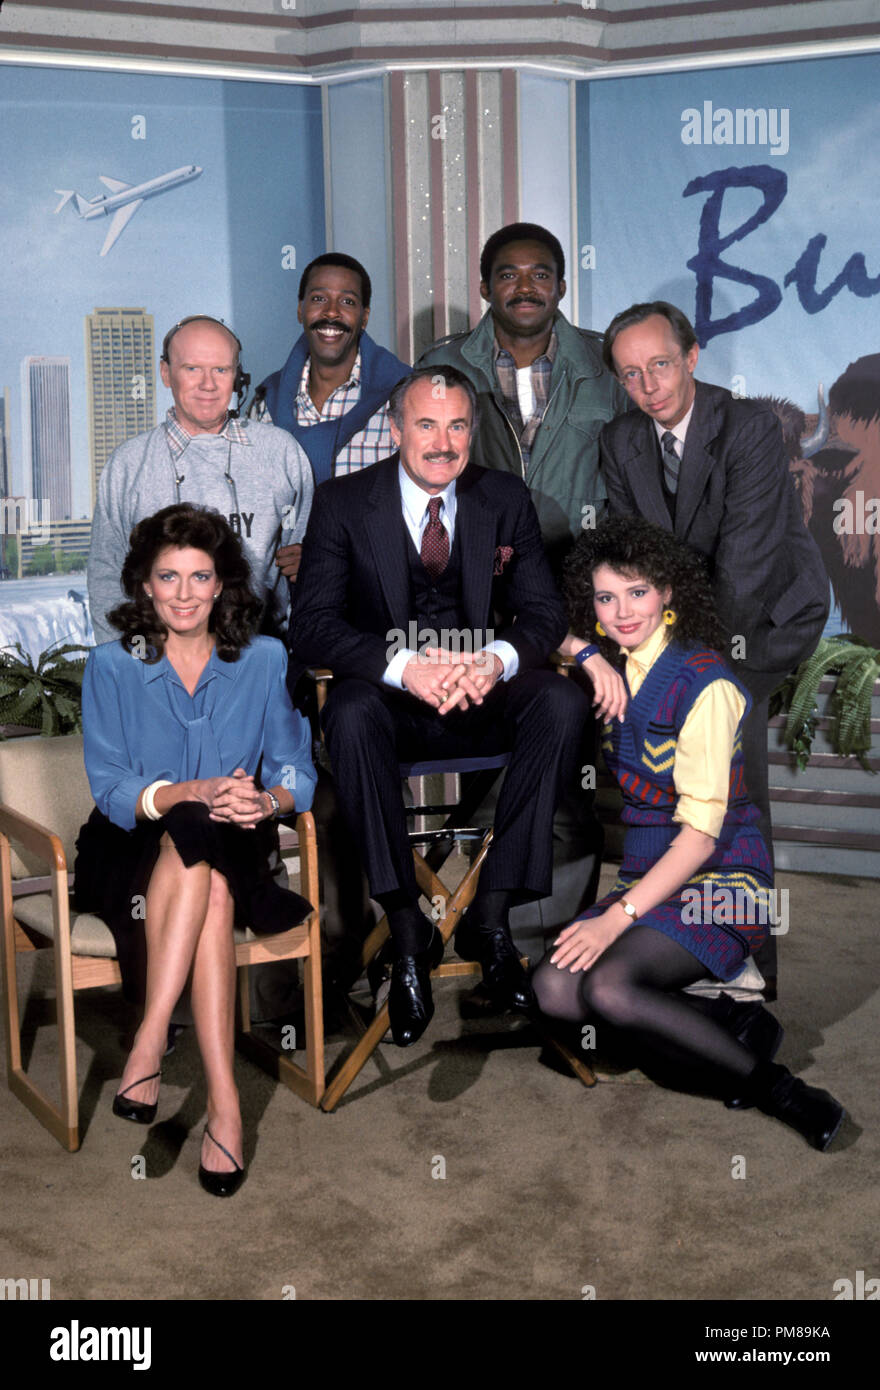 Studio Publicity Still from 'Buffalo Bill' Joanna Cassidy, John Fiedler, Meshach Taylor, Dabney Coleman, Charles Robinson, Max Wright, Geena Davis circa 1983   All Rights Reserved   File Reference # 31708259THA  For Editorial Use Only Stock Photo